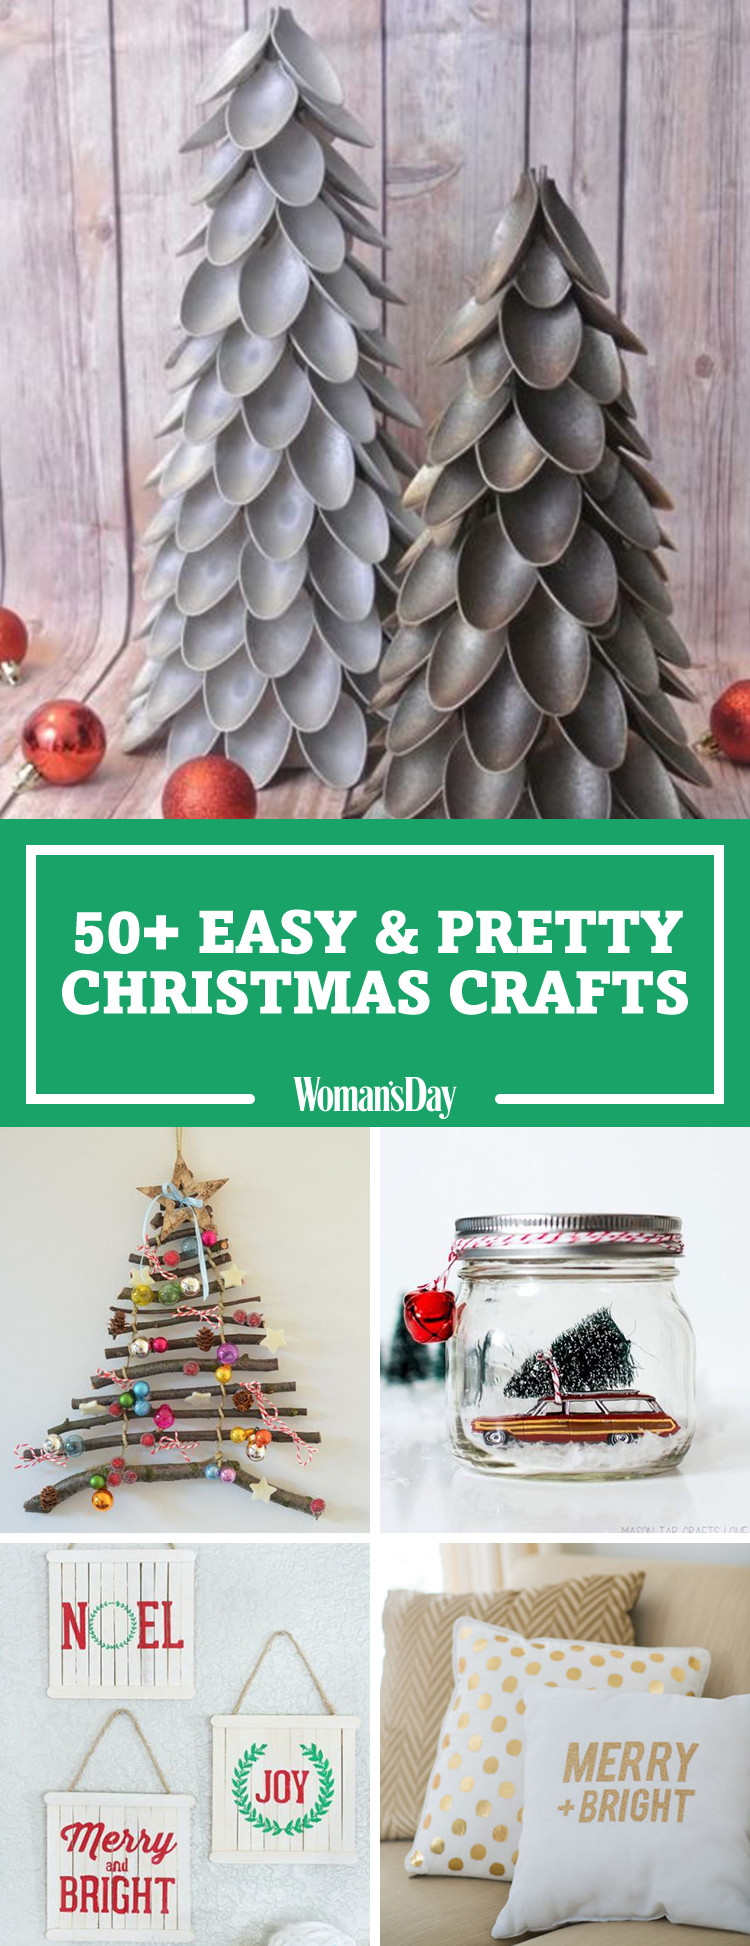 Christmas Crafting Projects
 55 Easy Christmas Crafts Simple DIY Holiday Craft Ideas